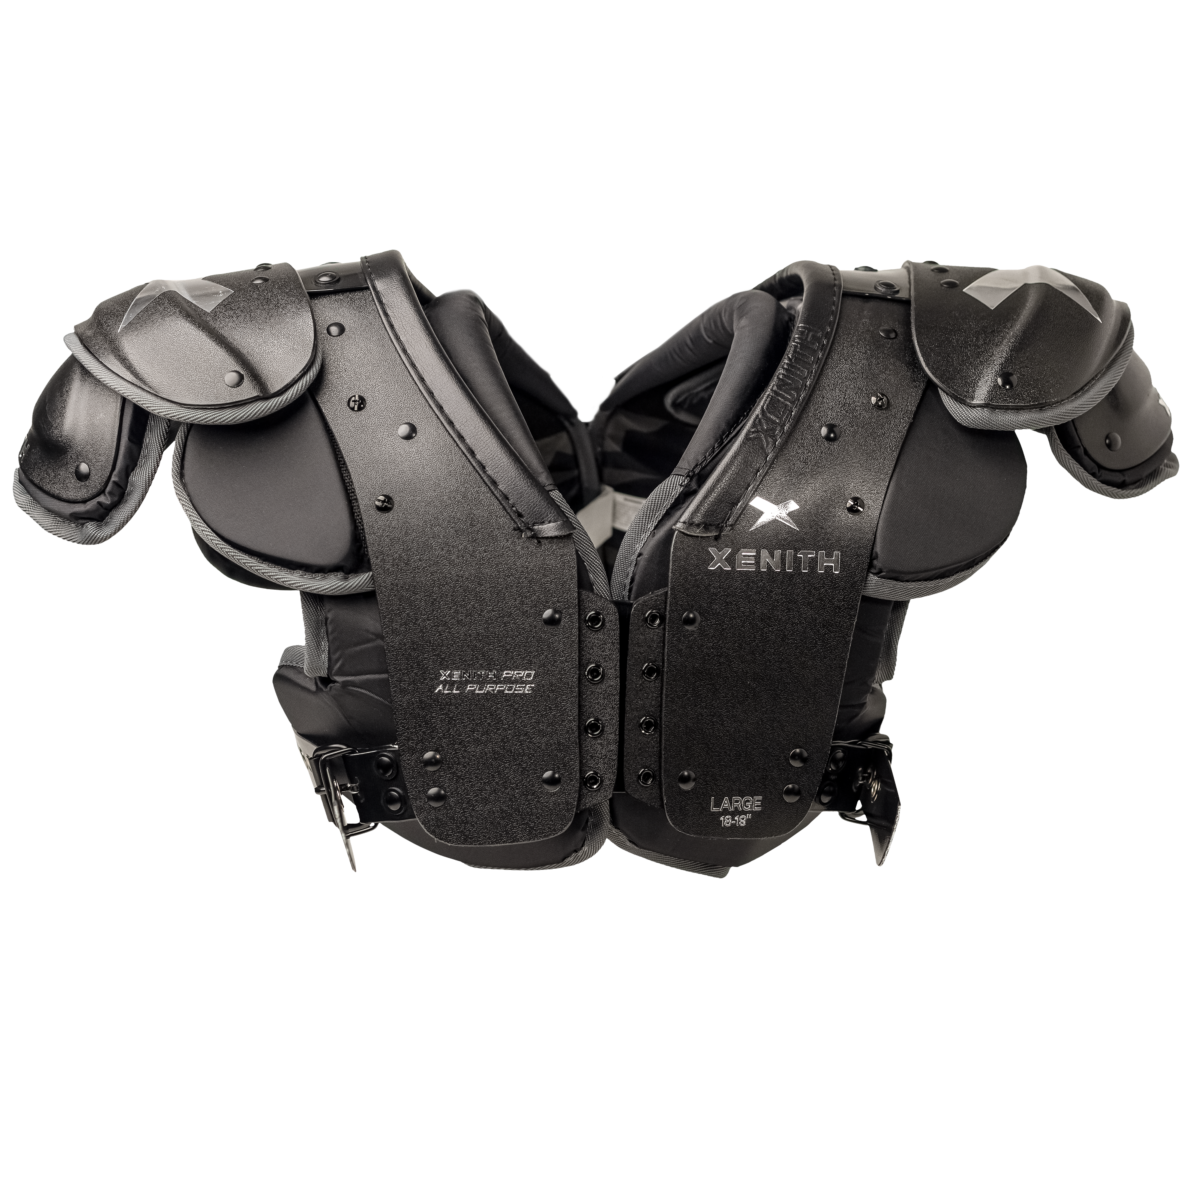 Front facing view of Xenith Pro All Purpose shoulder pads.